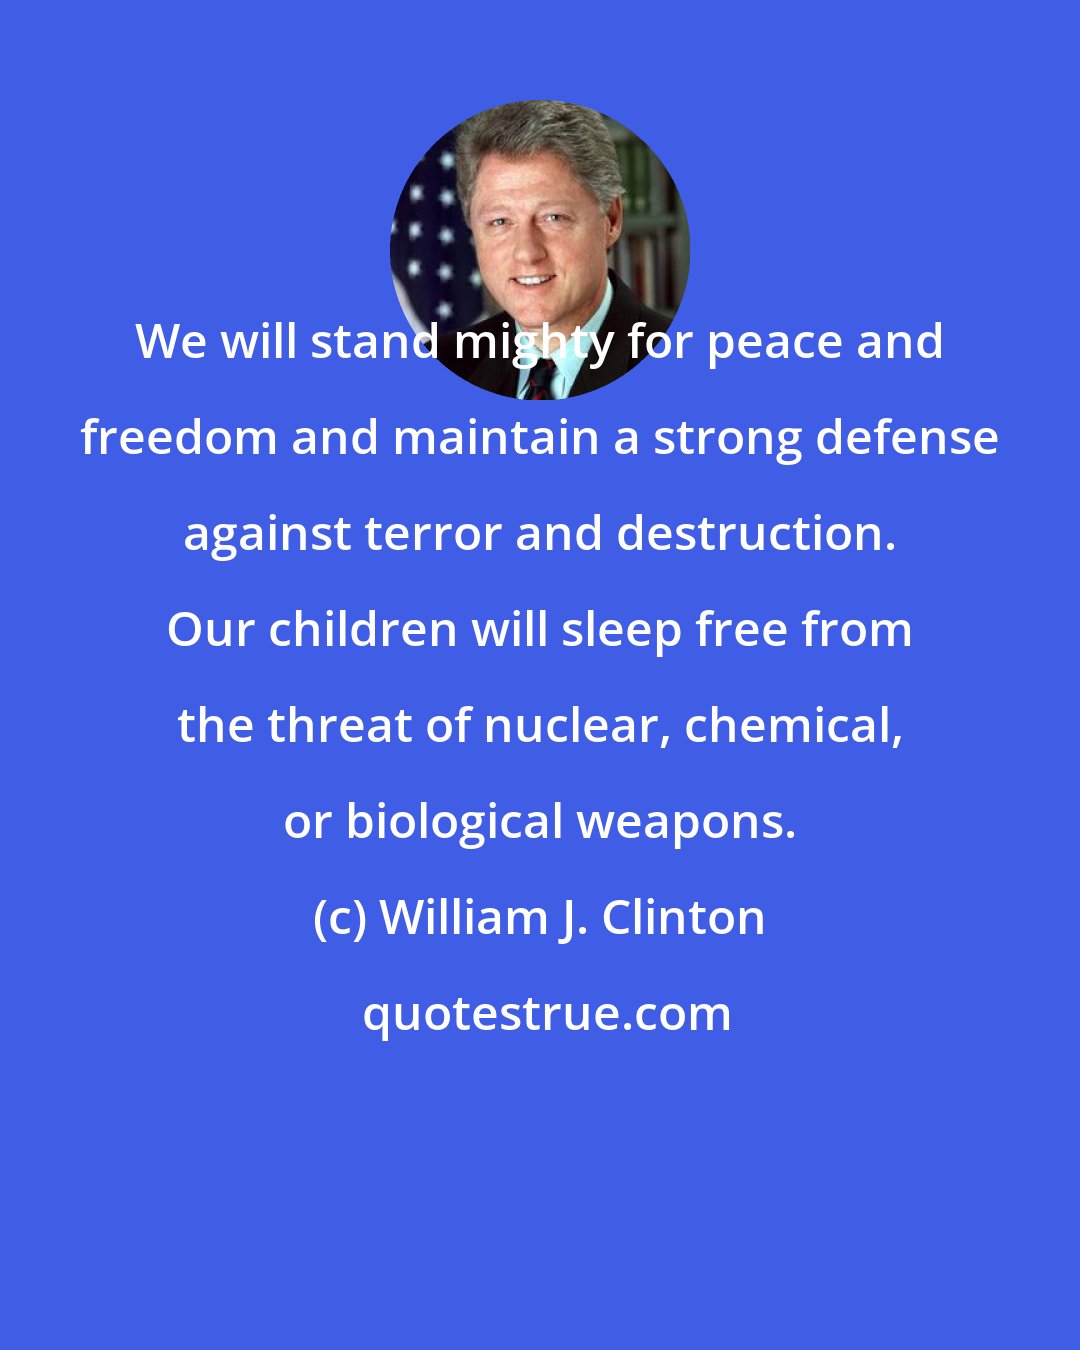 William J. Clinton: We will stand mighty for peace and freedom and maintain a strong defense against terror and destruction. Our children will sleep free from the threat of nuclear, chemical, or biological weapons.